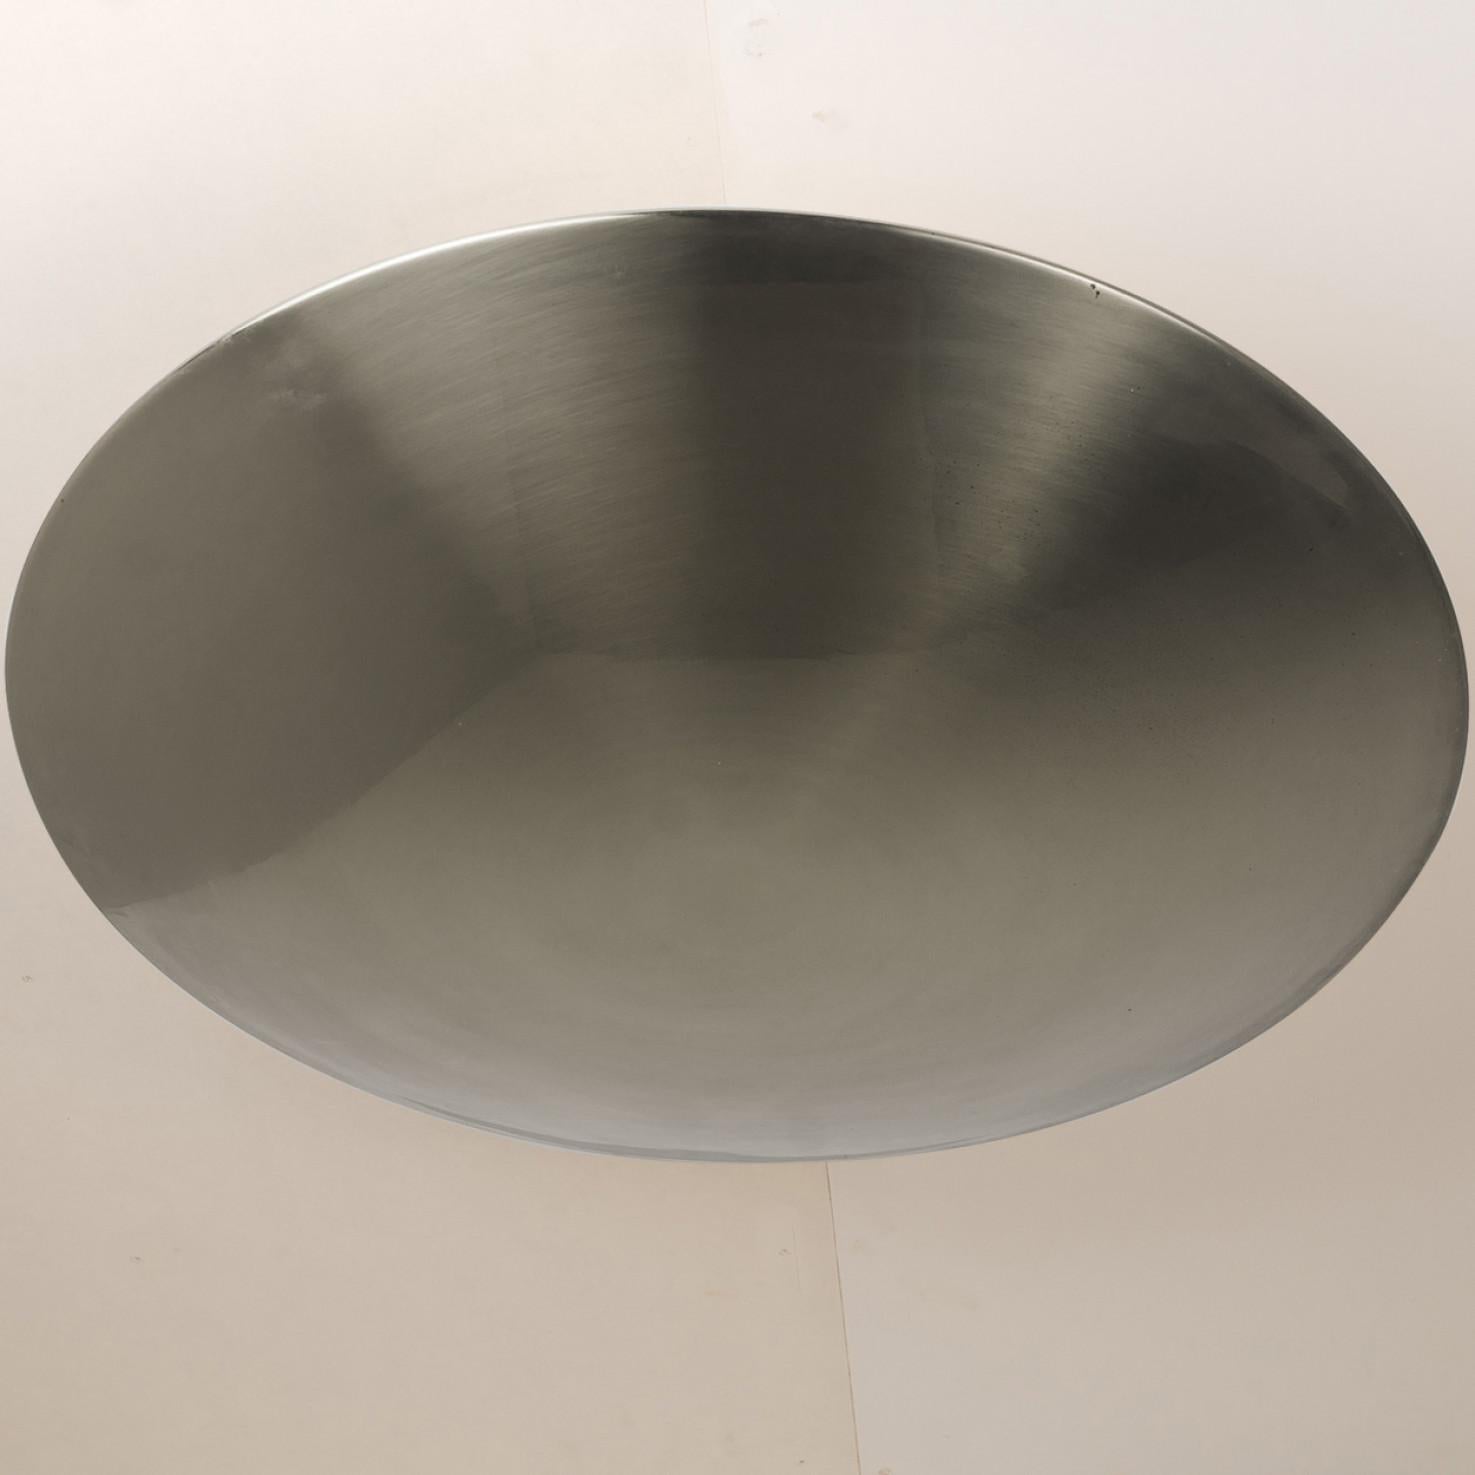 1 of the 2 high quality nickel flush mount ceiling lights or wall lights by Florian Schulz. A Nickel plated brass plate with five bulb setup around that stem, the flush mounts can also be used as wall lights.

The stylish and clean elegance of this